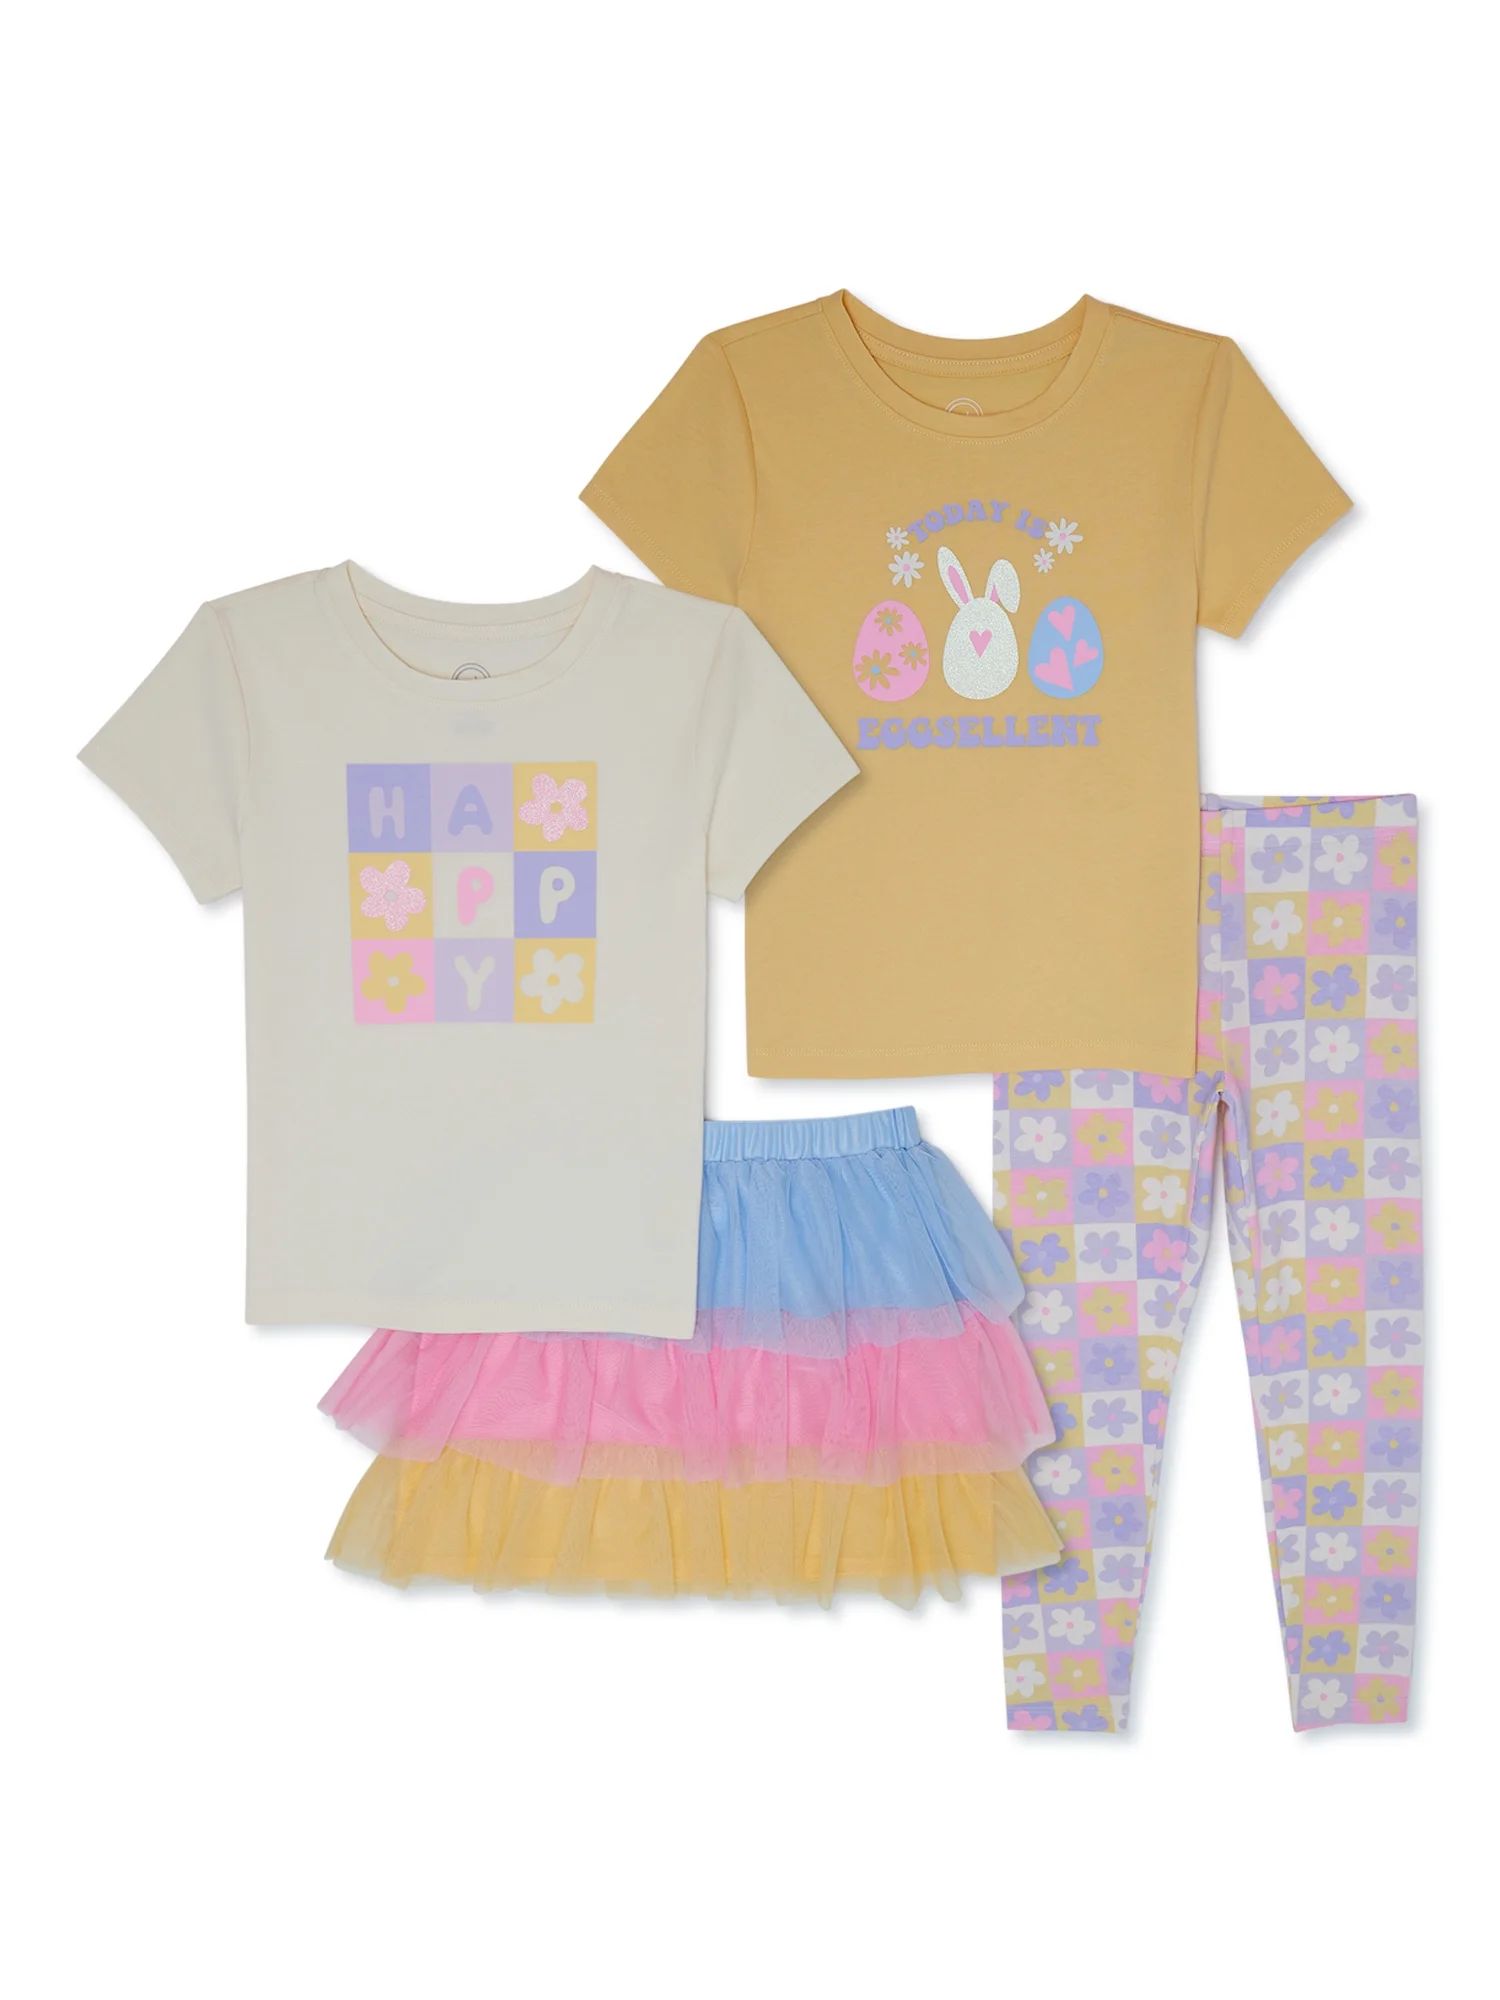 Wonder Nation Girls Easter Graphic Tees, Leggings and Skirt Outfit Set, 4-Piece, Sizes 4-18 | Walmart (US)